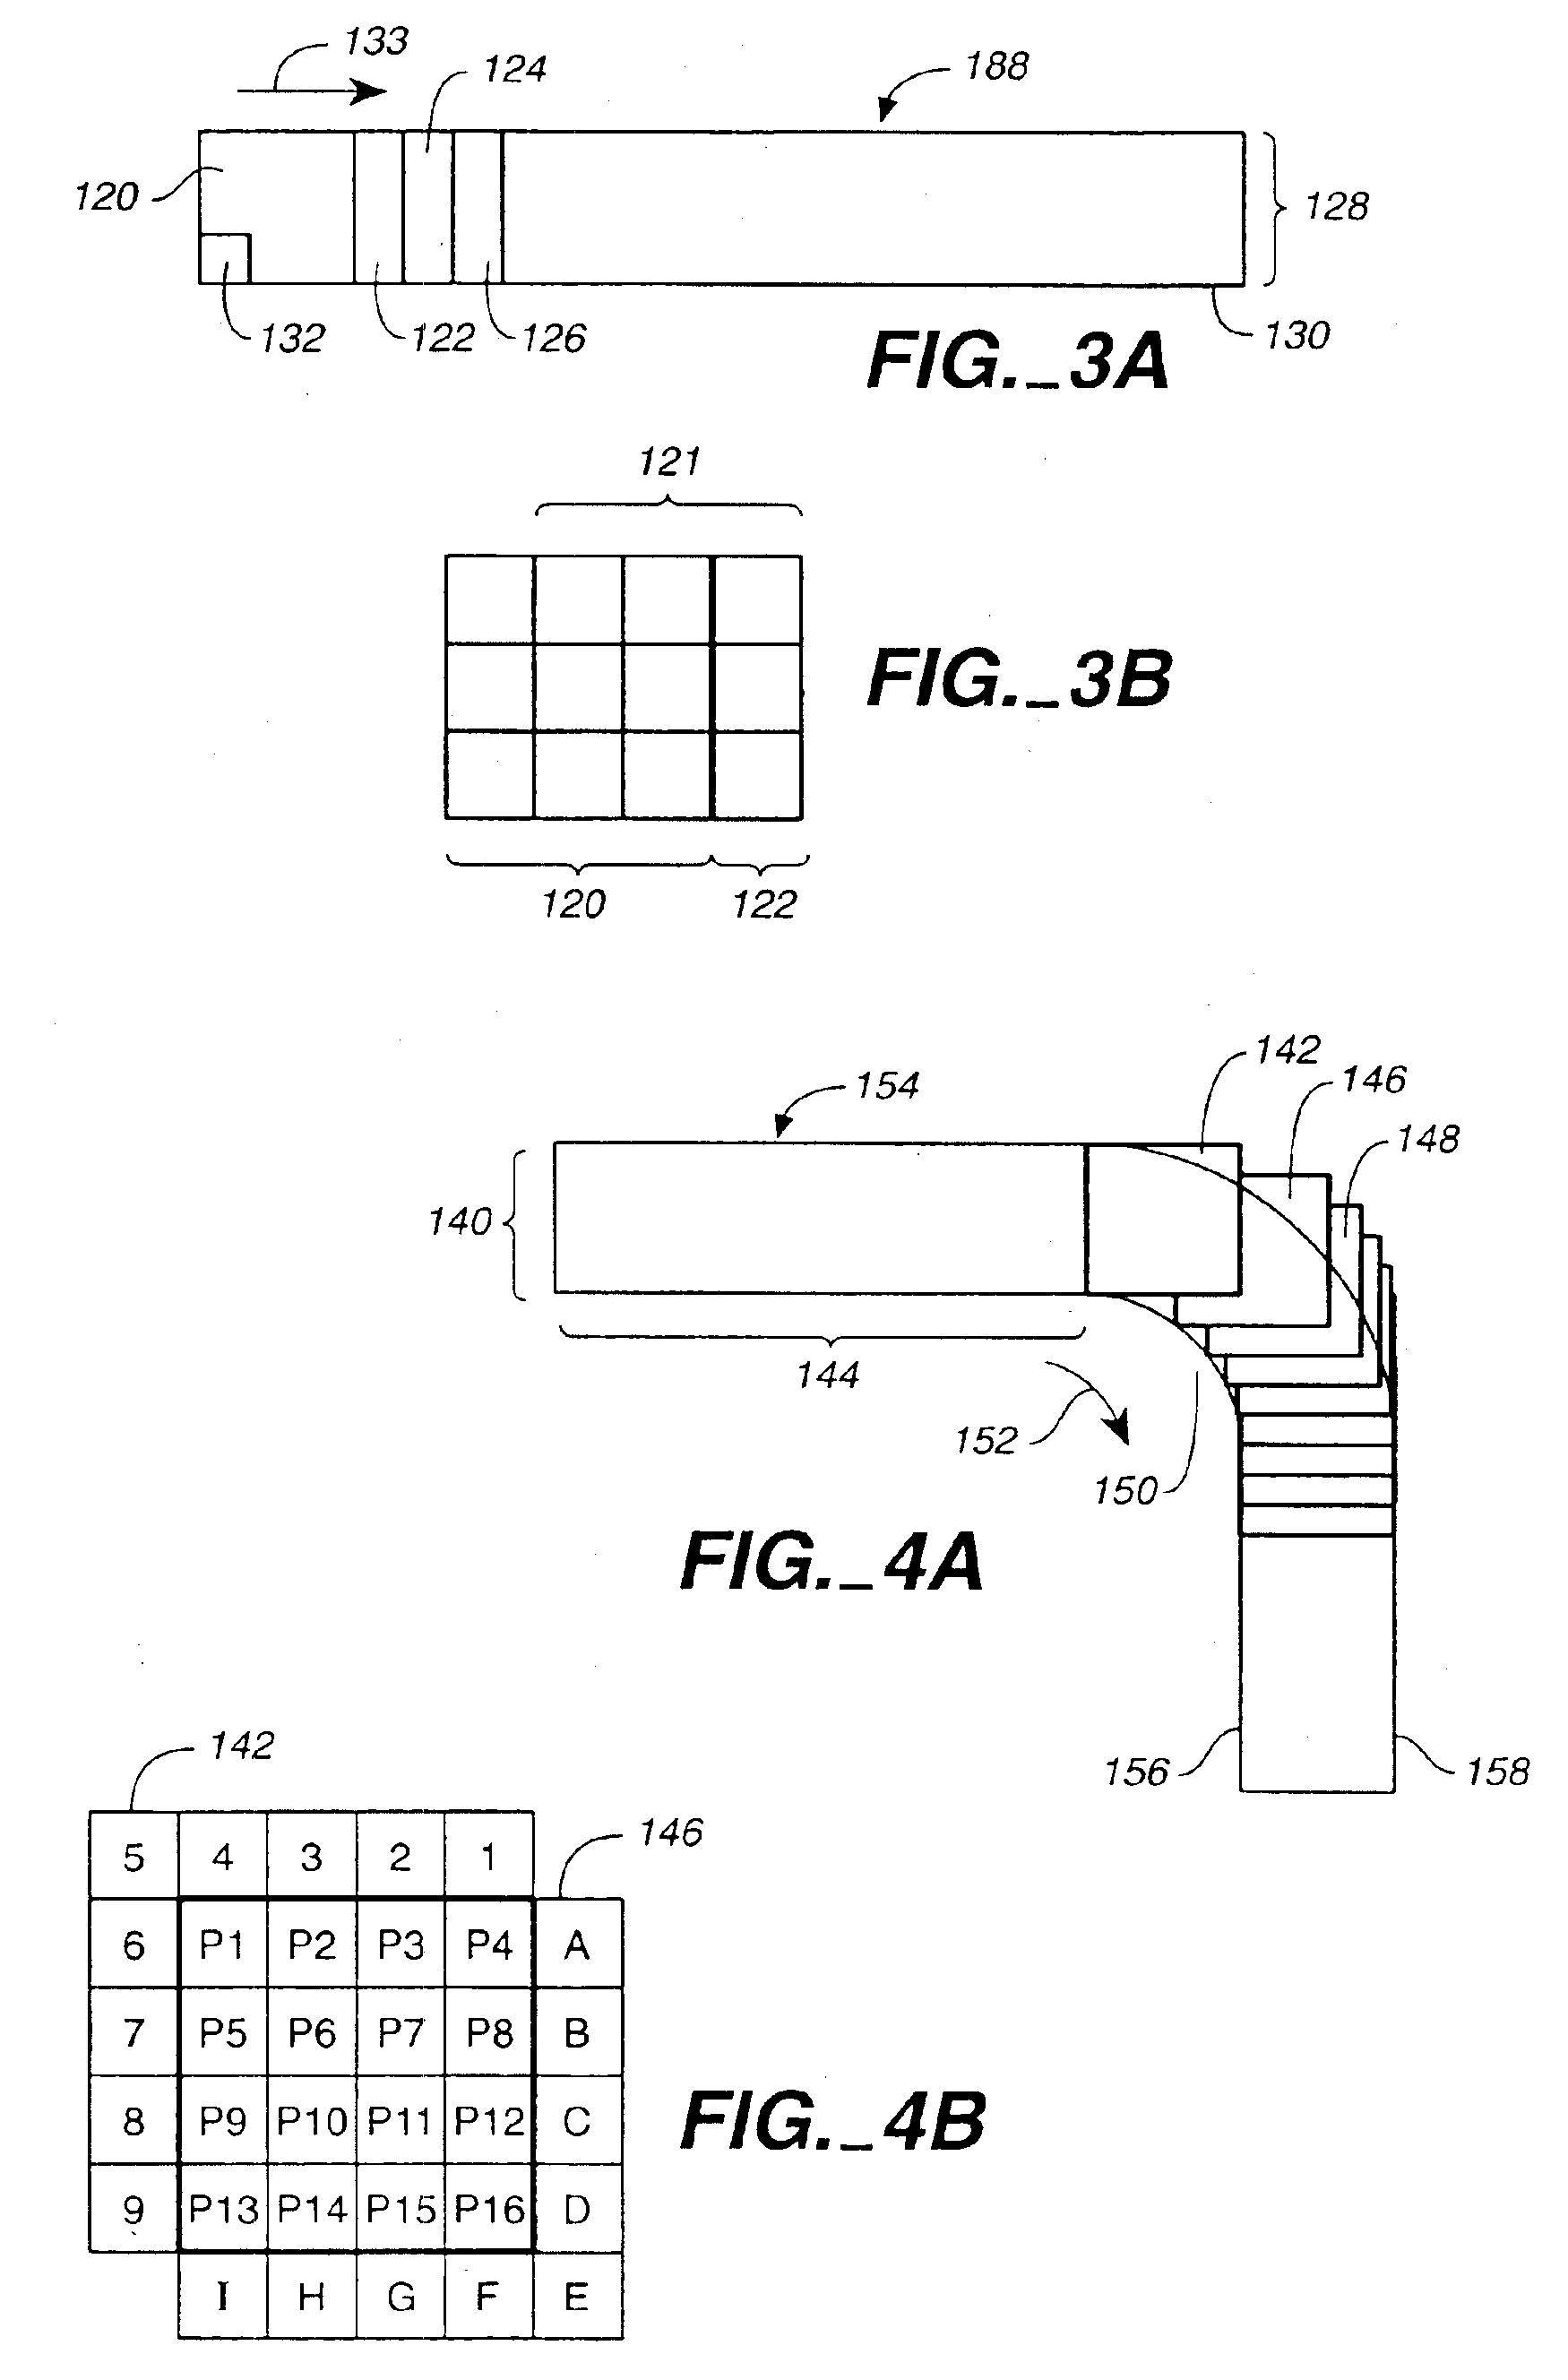 Method and apparatus for filling an image on a display screen